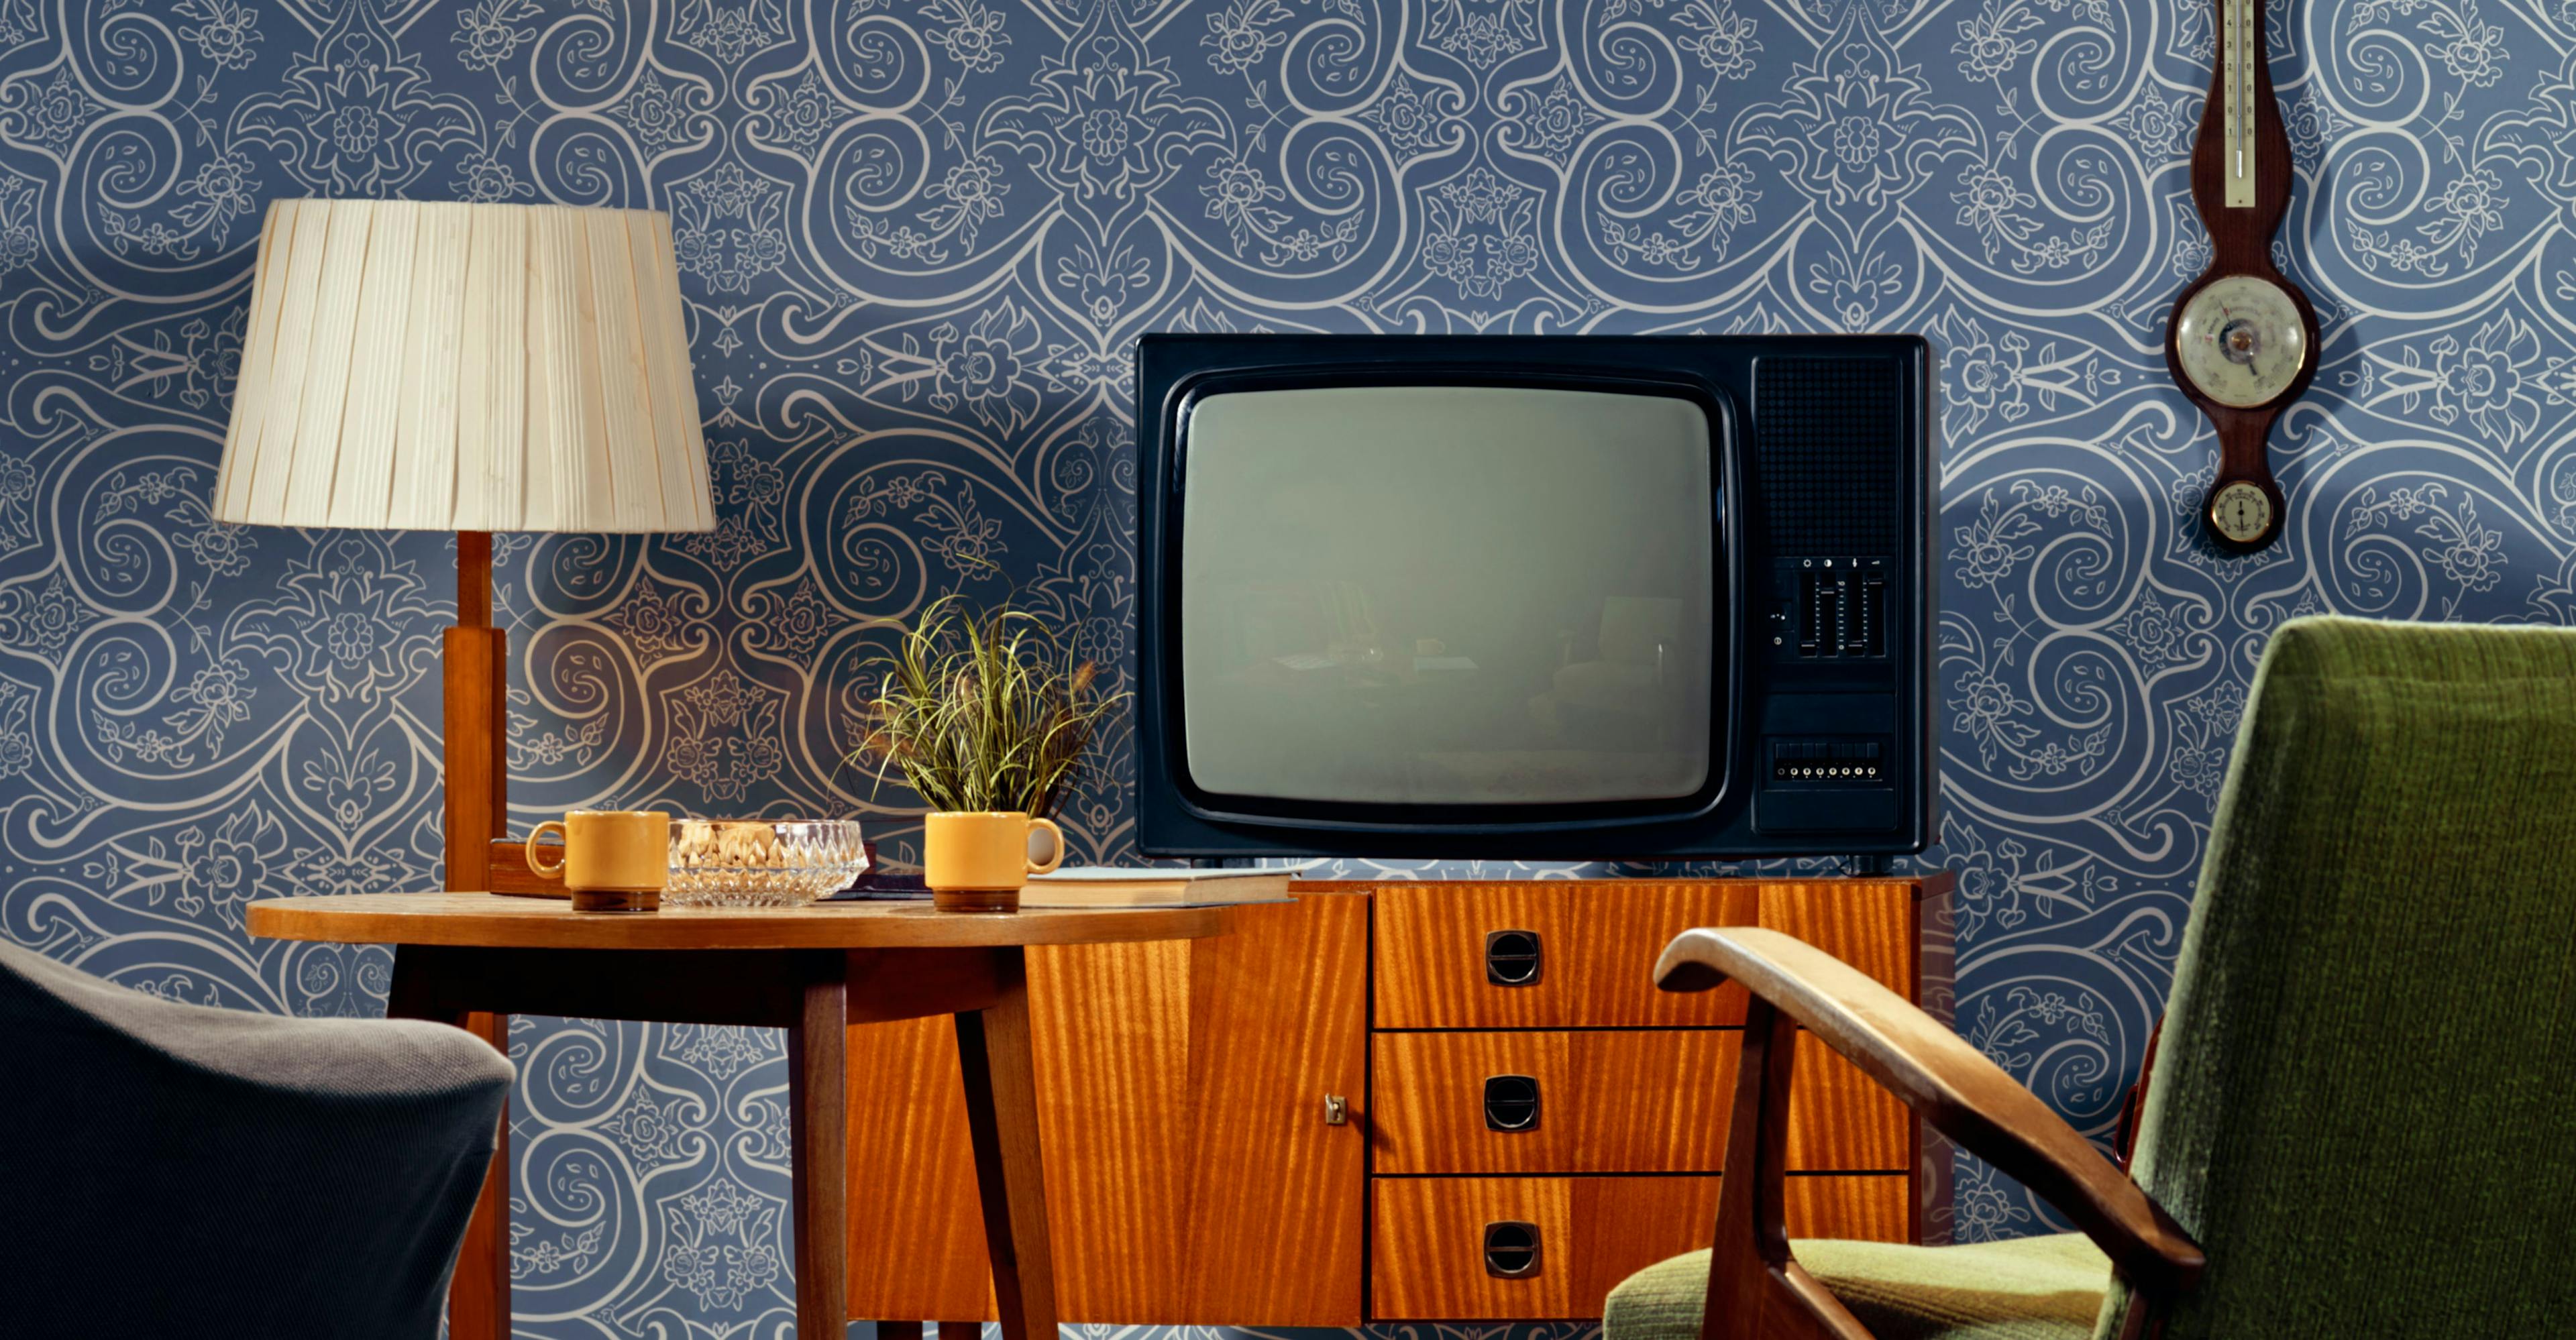 A classic TV set in a midcentury modern living room 